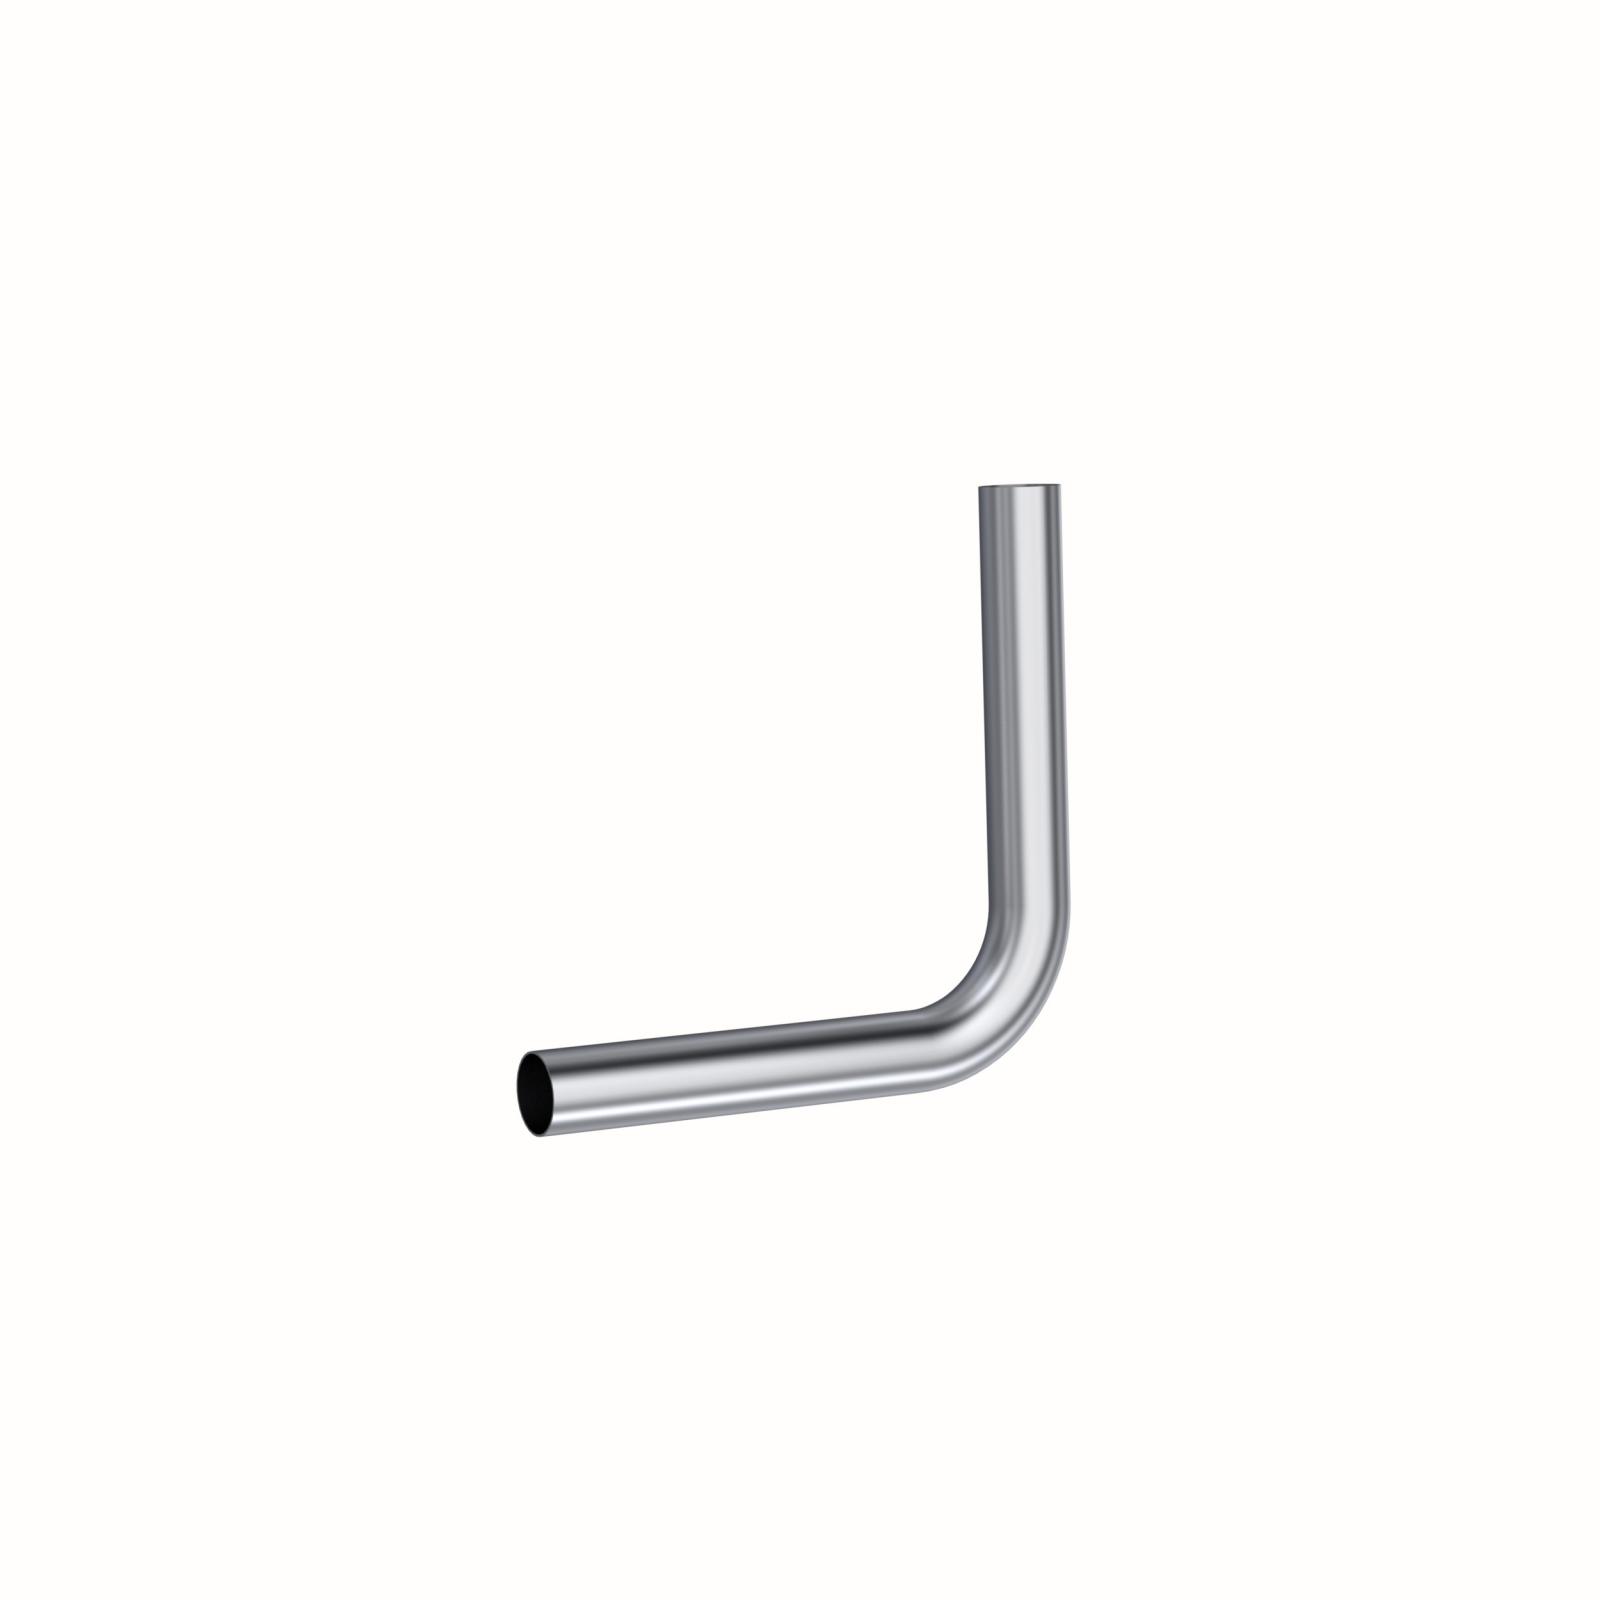 Exhaust Pipe 2.Exhaust Pipe 25 in 90 Degree Bend 1 2 in Legs Aluminized Steel MB